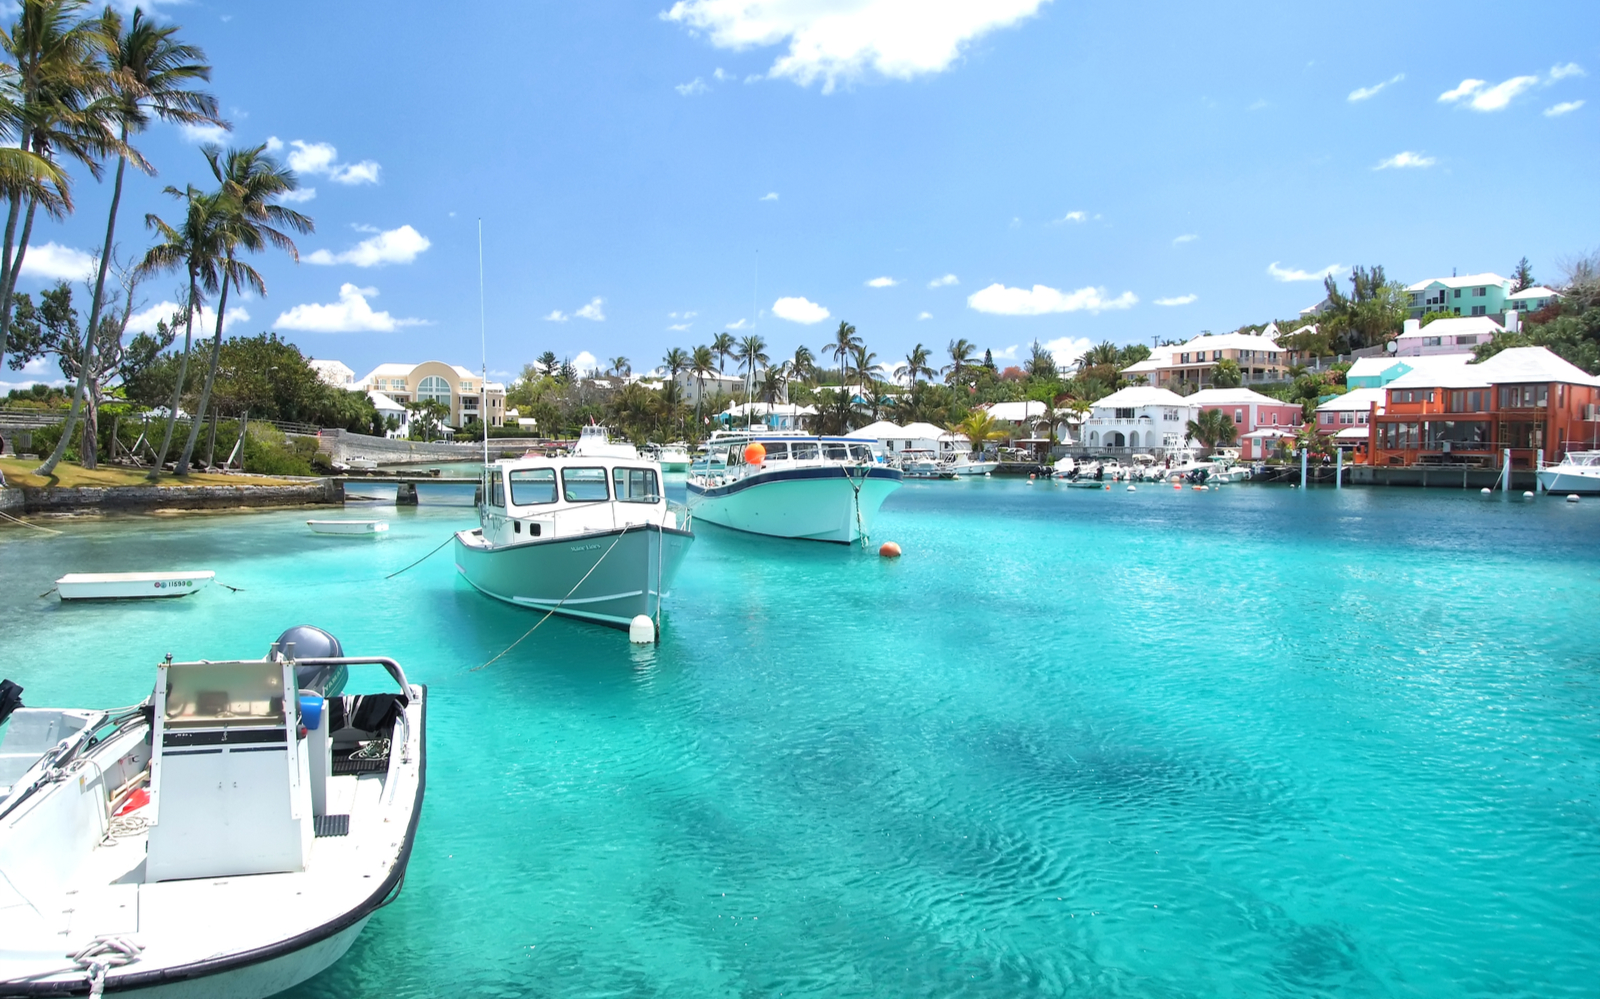 Gorgeous blue sea pictured during the best time to visit Bermuda